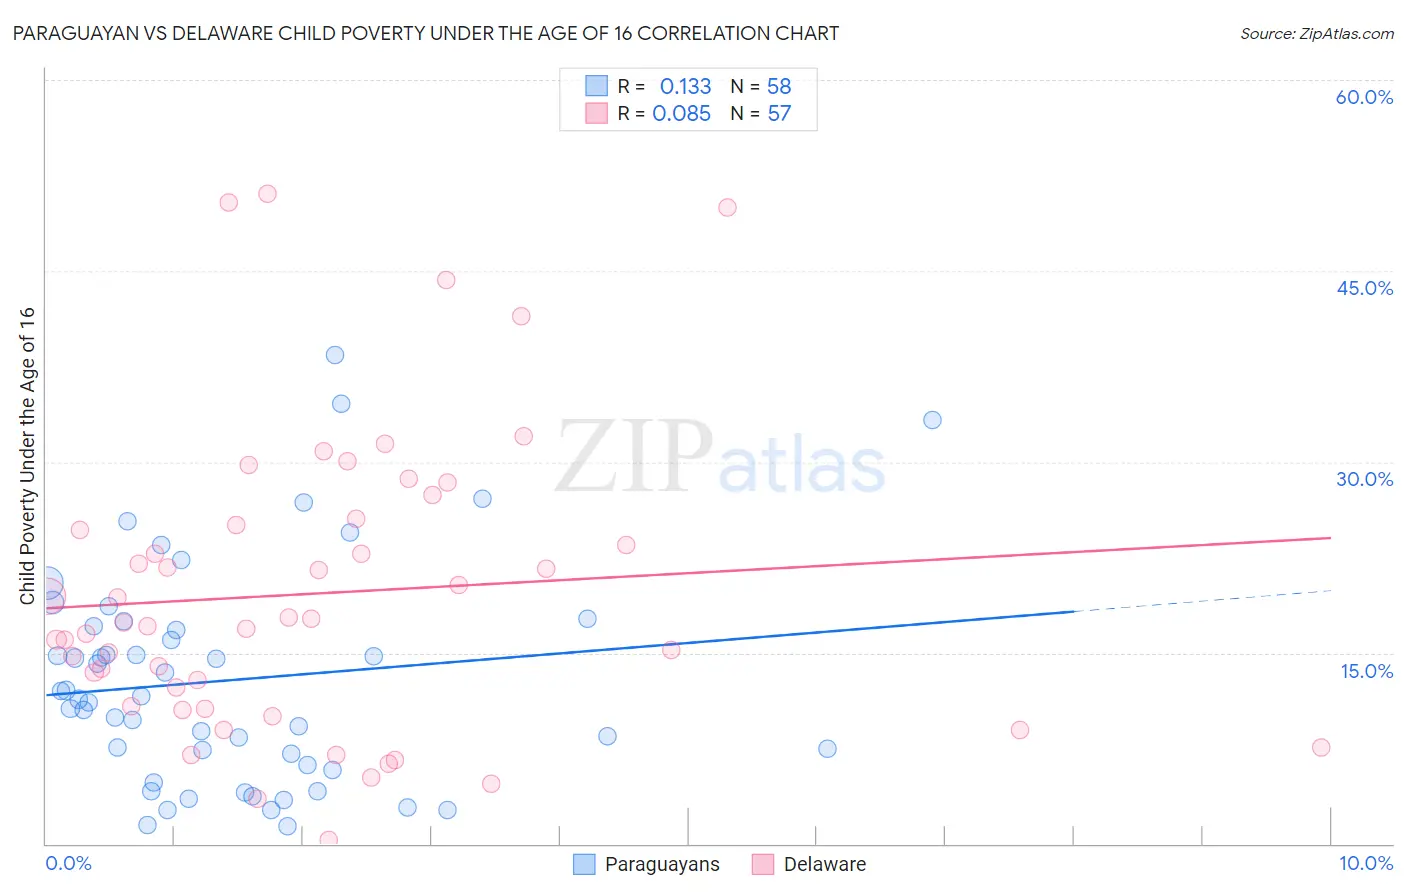 Paraguayan vs Delaware Child Poverty Under the Age of 16